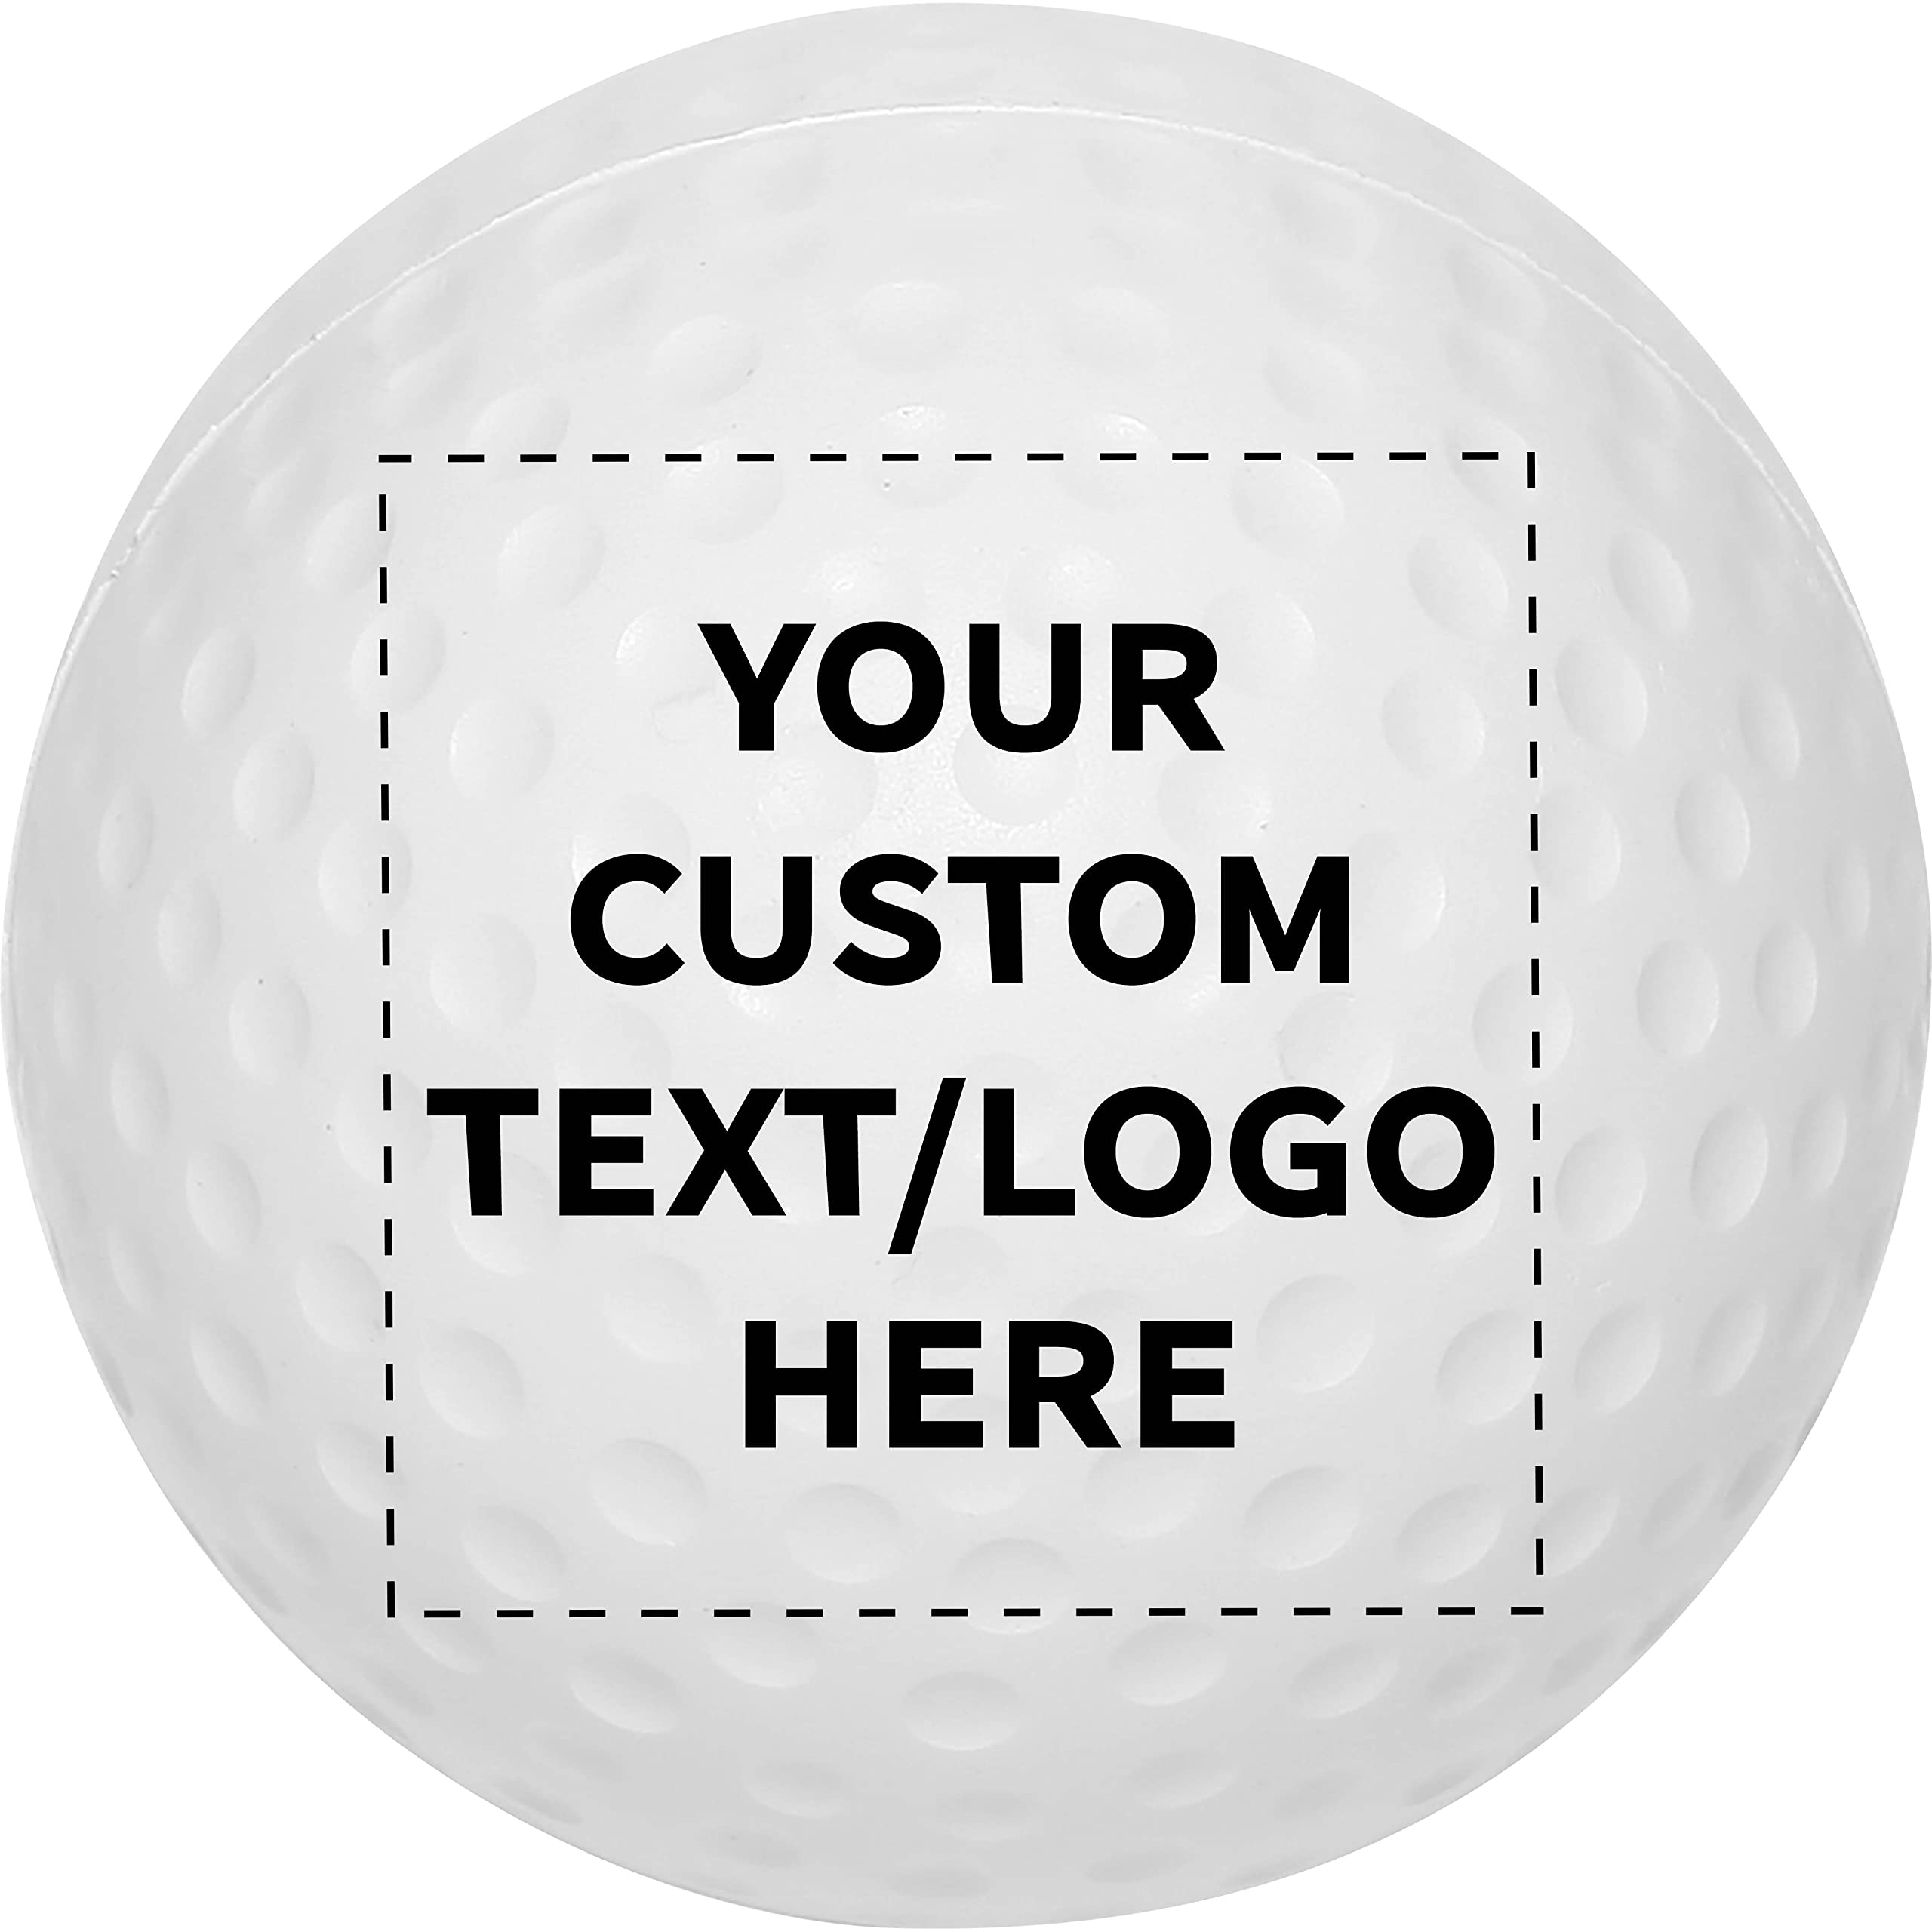 Custom Golf Stress Balls Set of 10, Personalized Bulk Pack - Anxiety Stress Relief, Perfect for Your Desk, Office or Home - White